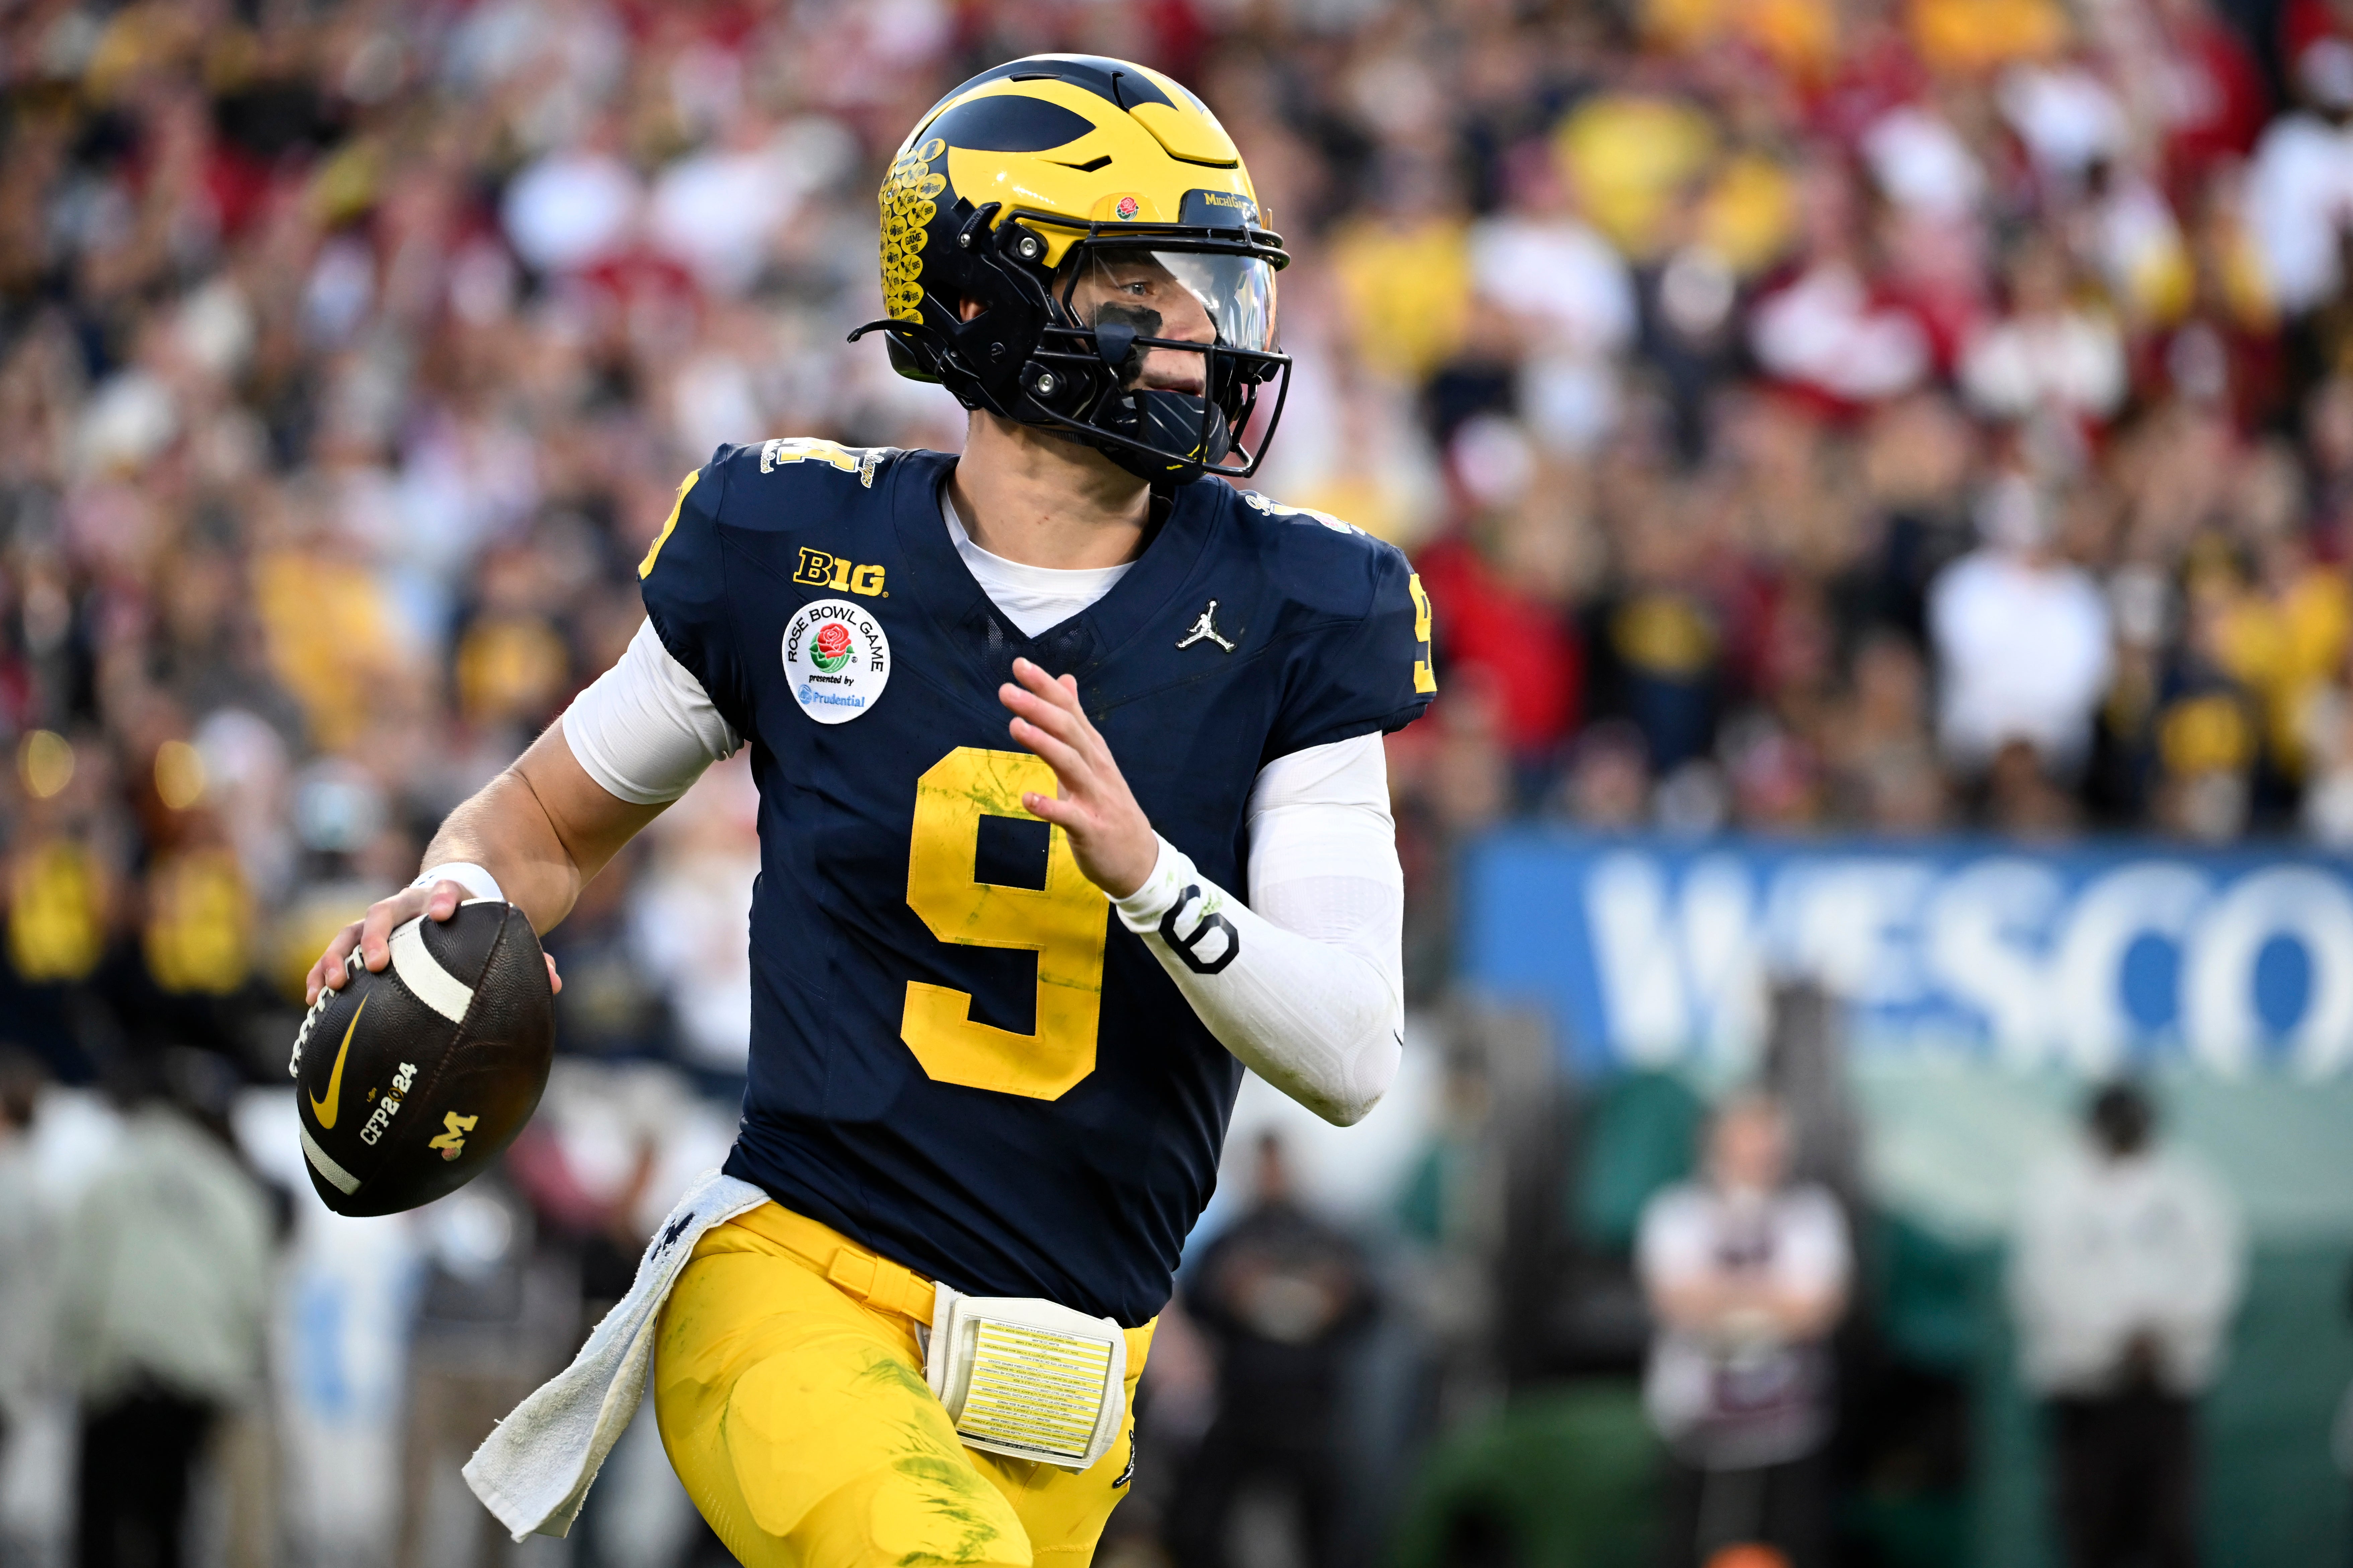 Michigan quarterback J.J. McCarthy (9) rolls out during the second half of the Rose Bowl